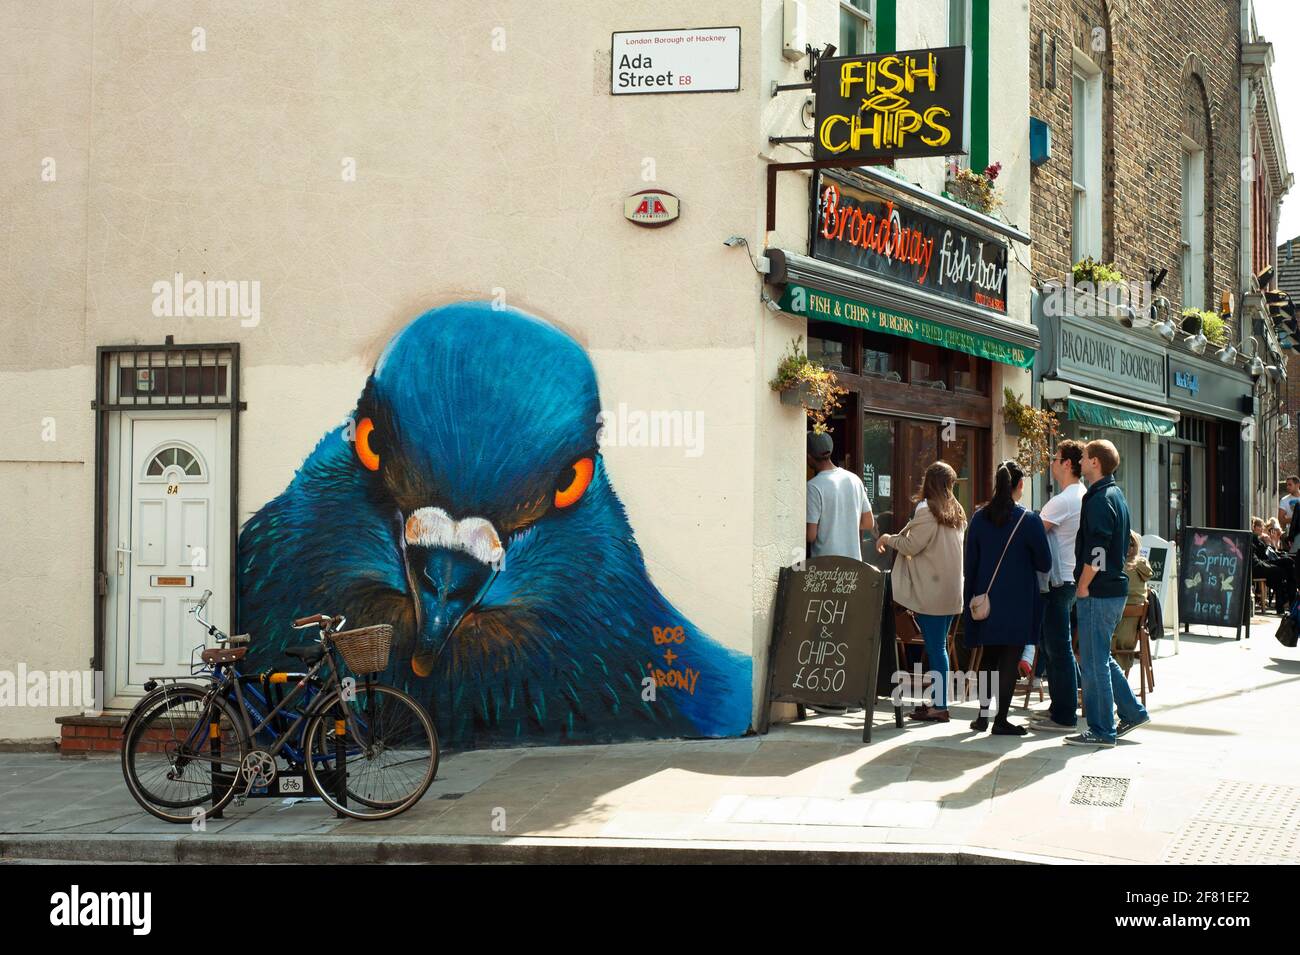 People lining up outside a Fish & chips shop on Broadway Market with a large pigeon (by Boe & Irony) watching around the corner. London, UK. Apr 2013 Stock Photo